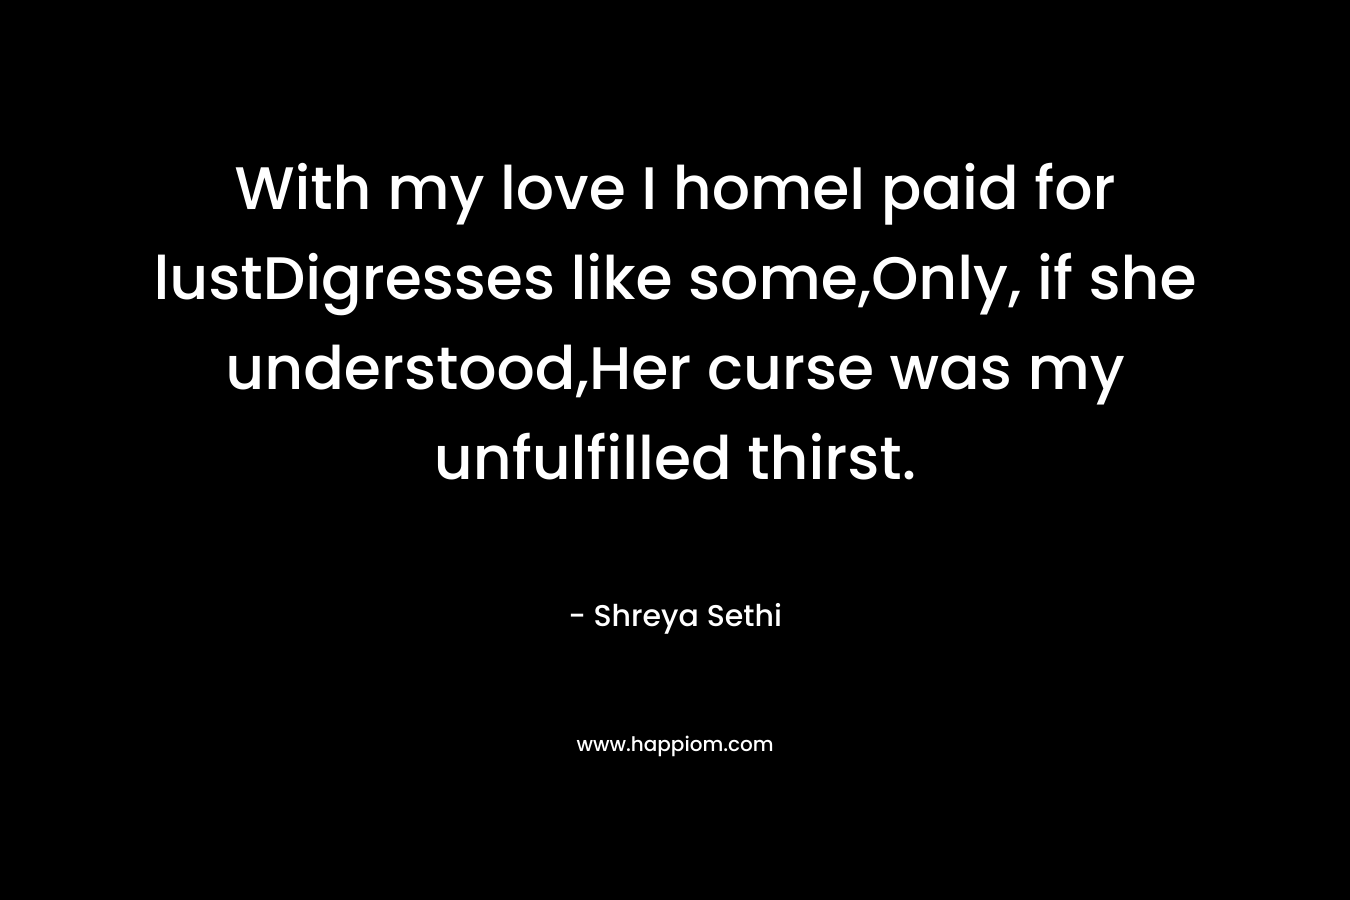 With my love I homeI paid for lustDigresses like some,Only, if she understood,Her curse was my unfulfilled thirst. – Shreya Sethi